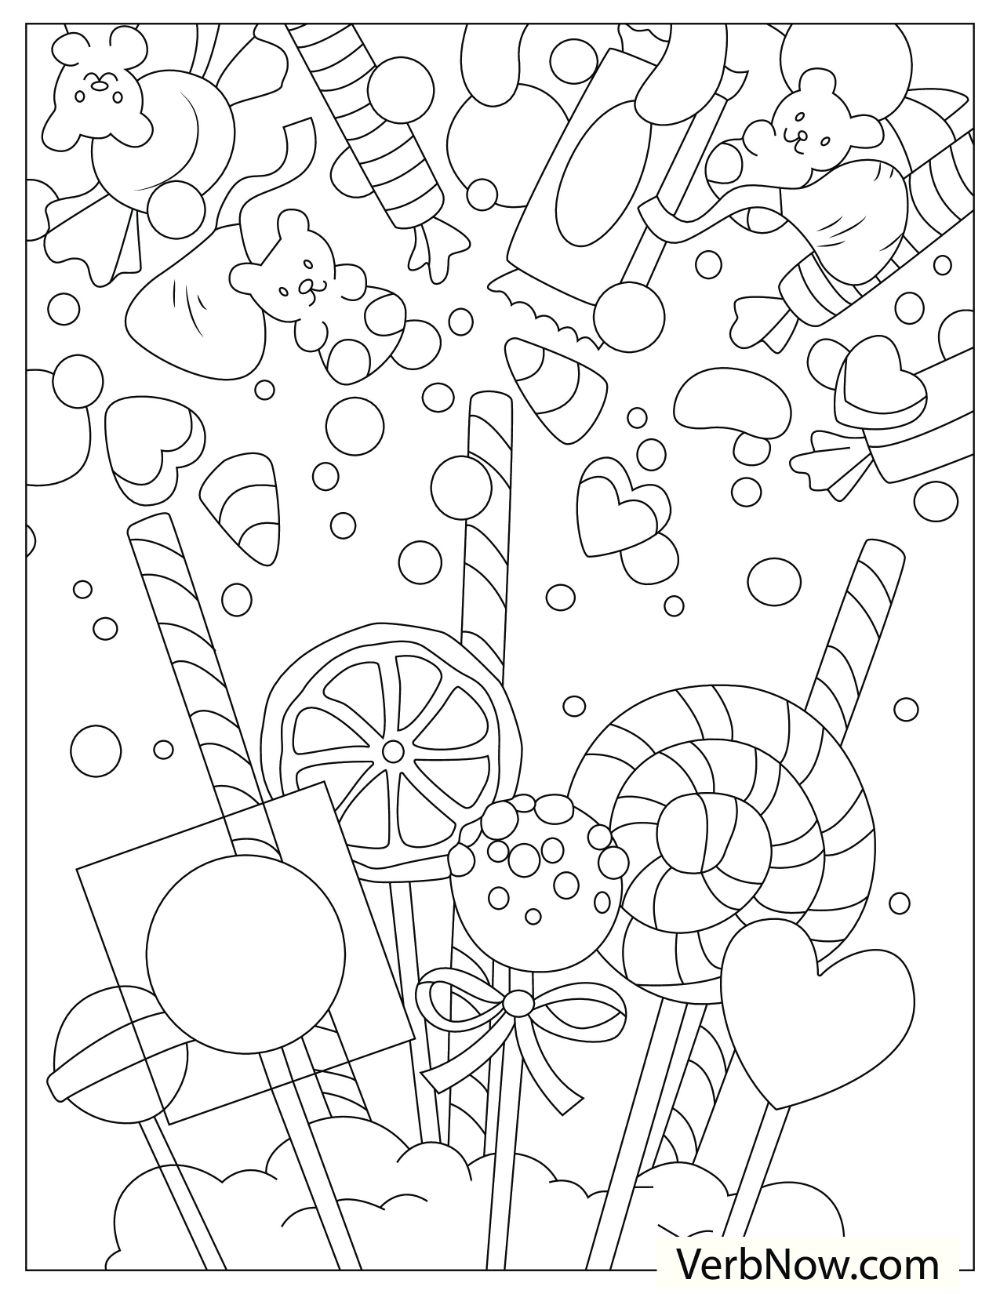 Free CANDY Coloring Pages for Download (Printable PDF) - VerbNow